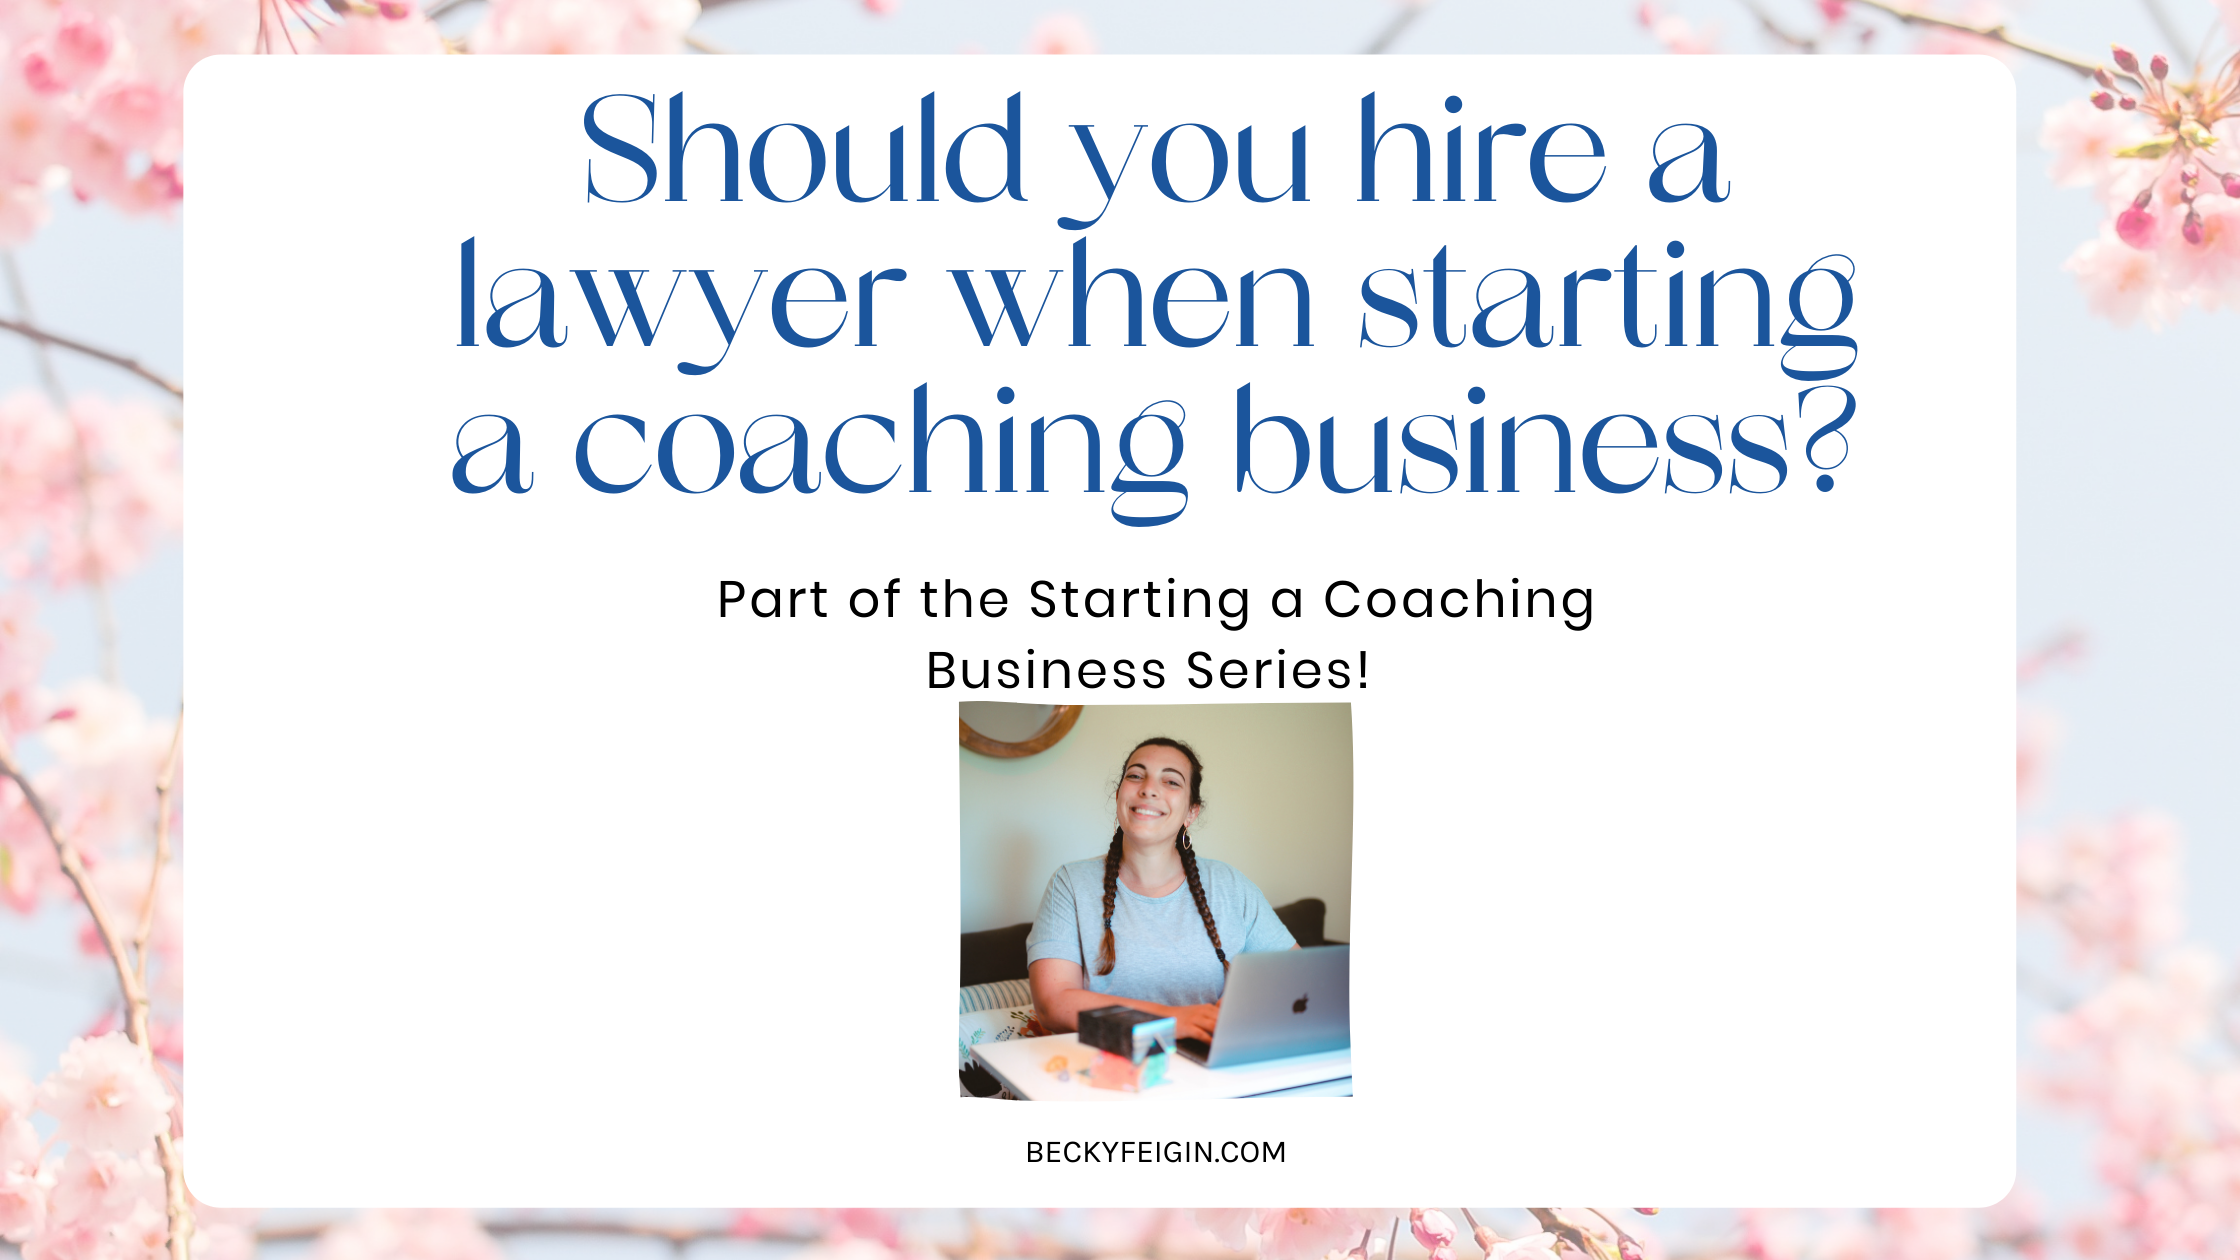 Should you hire a lawyer when starting a coaching business banner